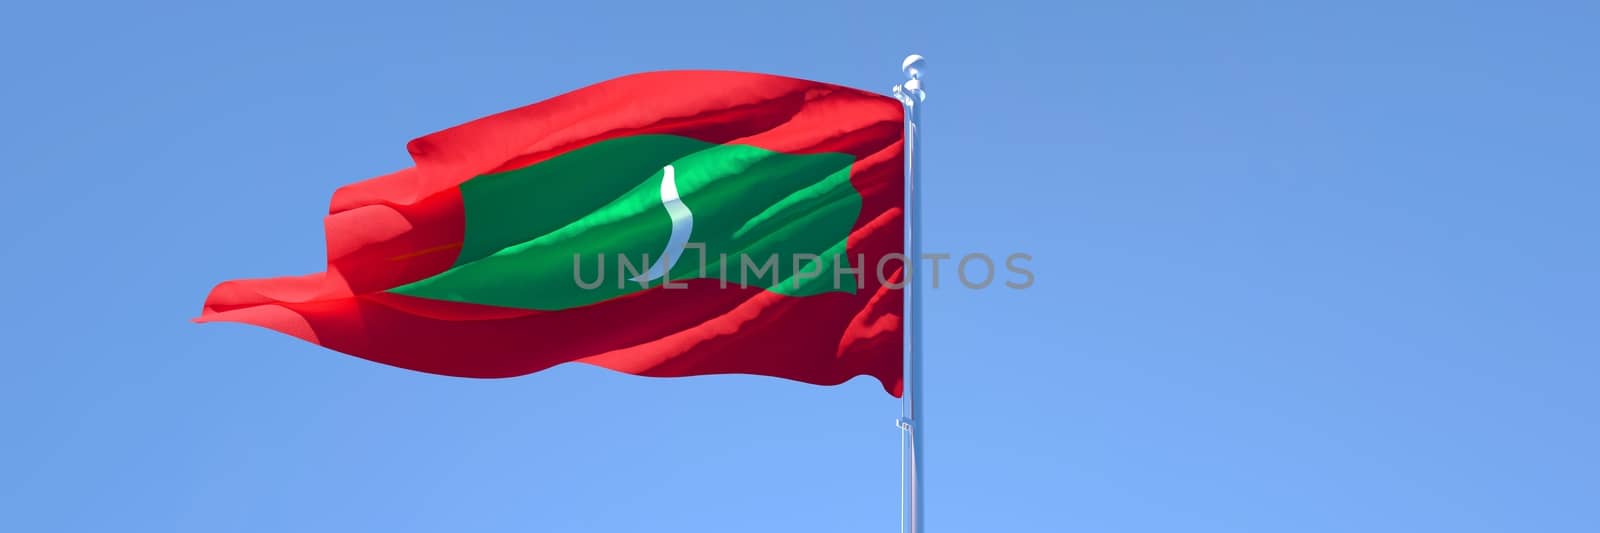 3D rendering of the national flag of Maldives waving in the wind against a blue sky